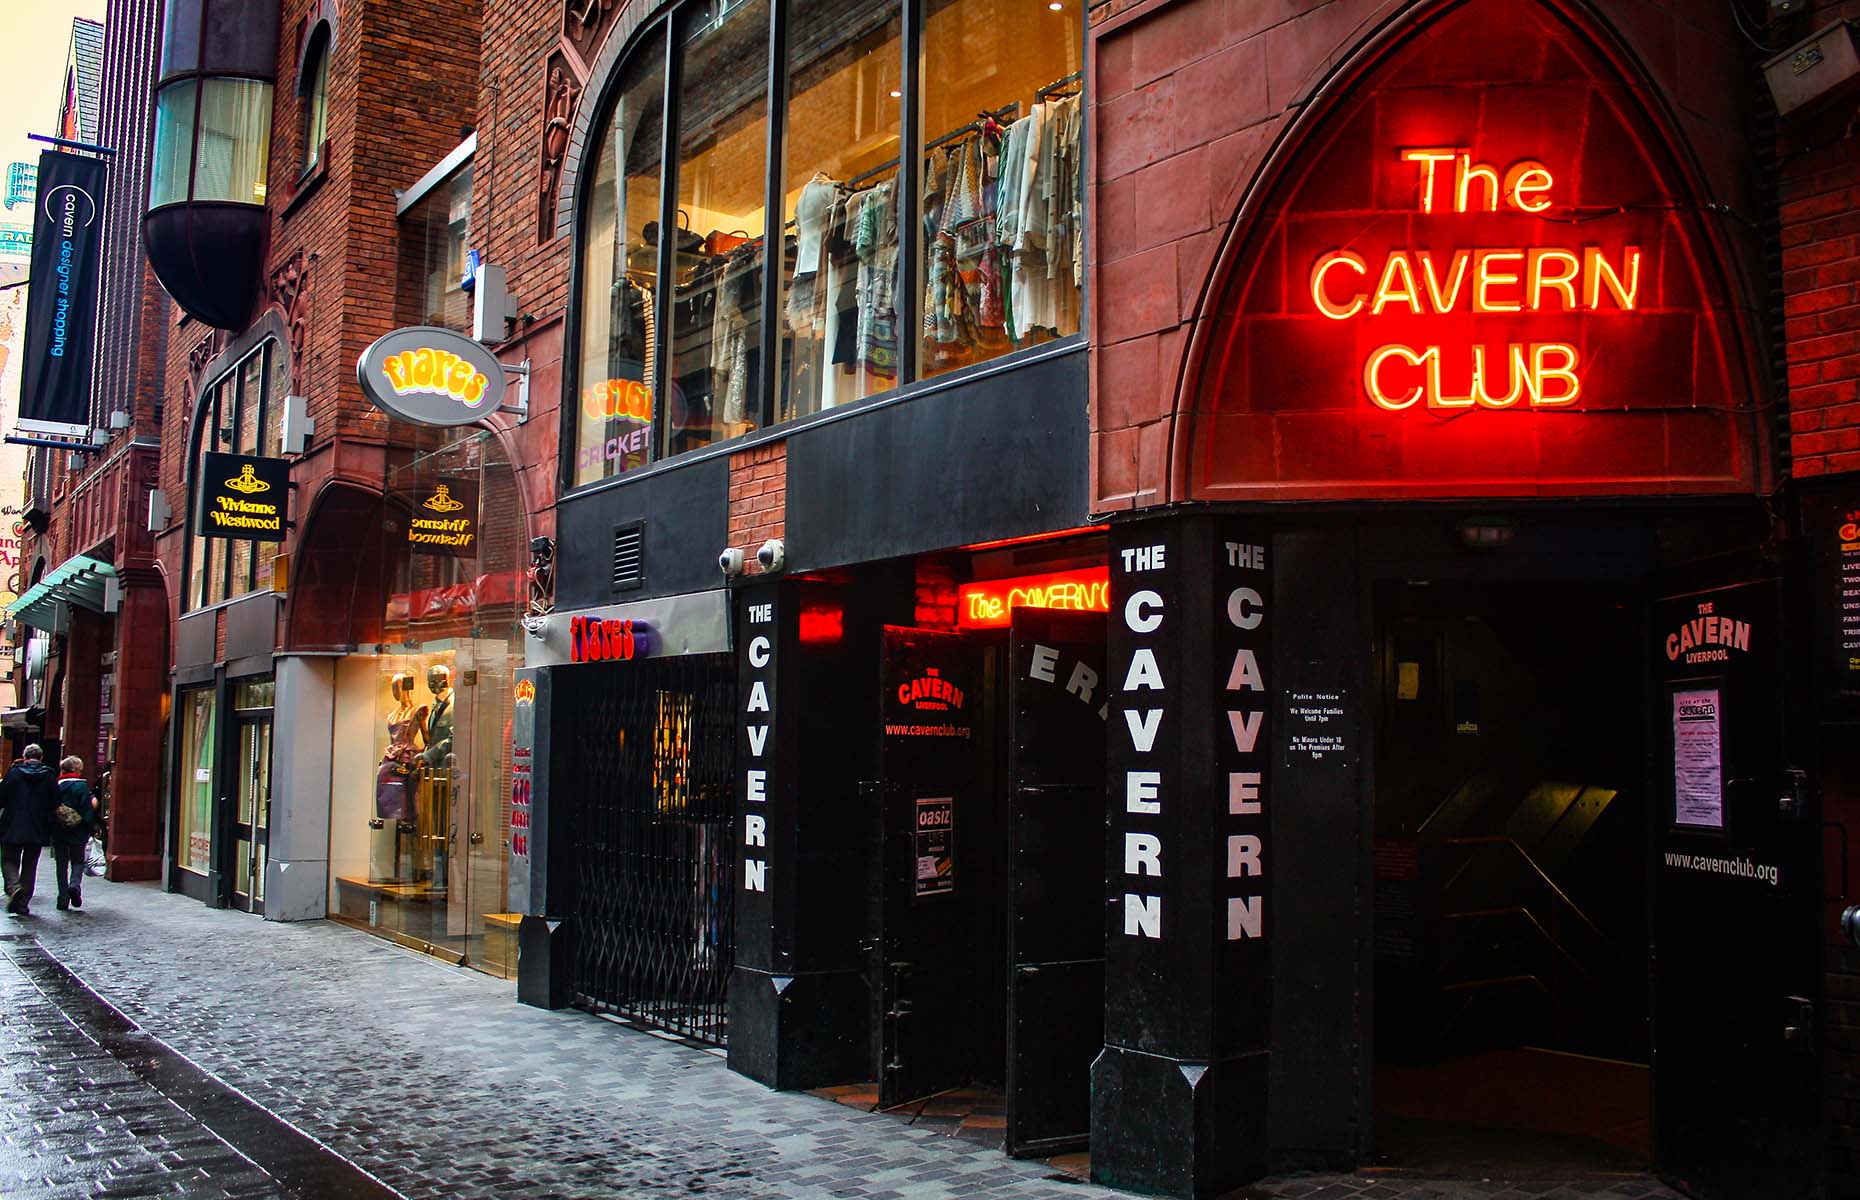 The Cavern Club in Liverpool (Image: Alisia Luther/Shutterstock)